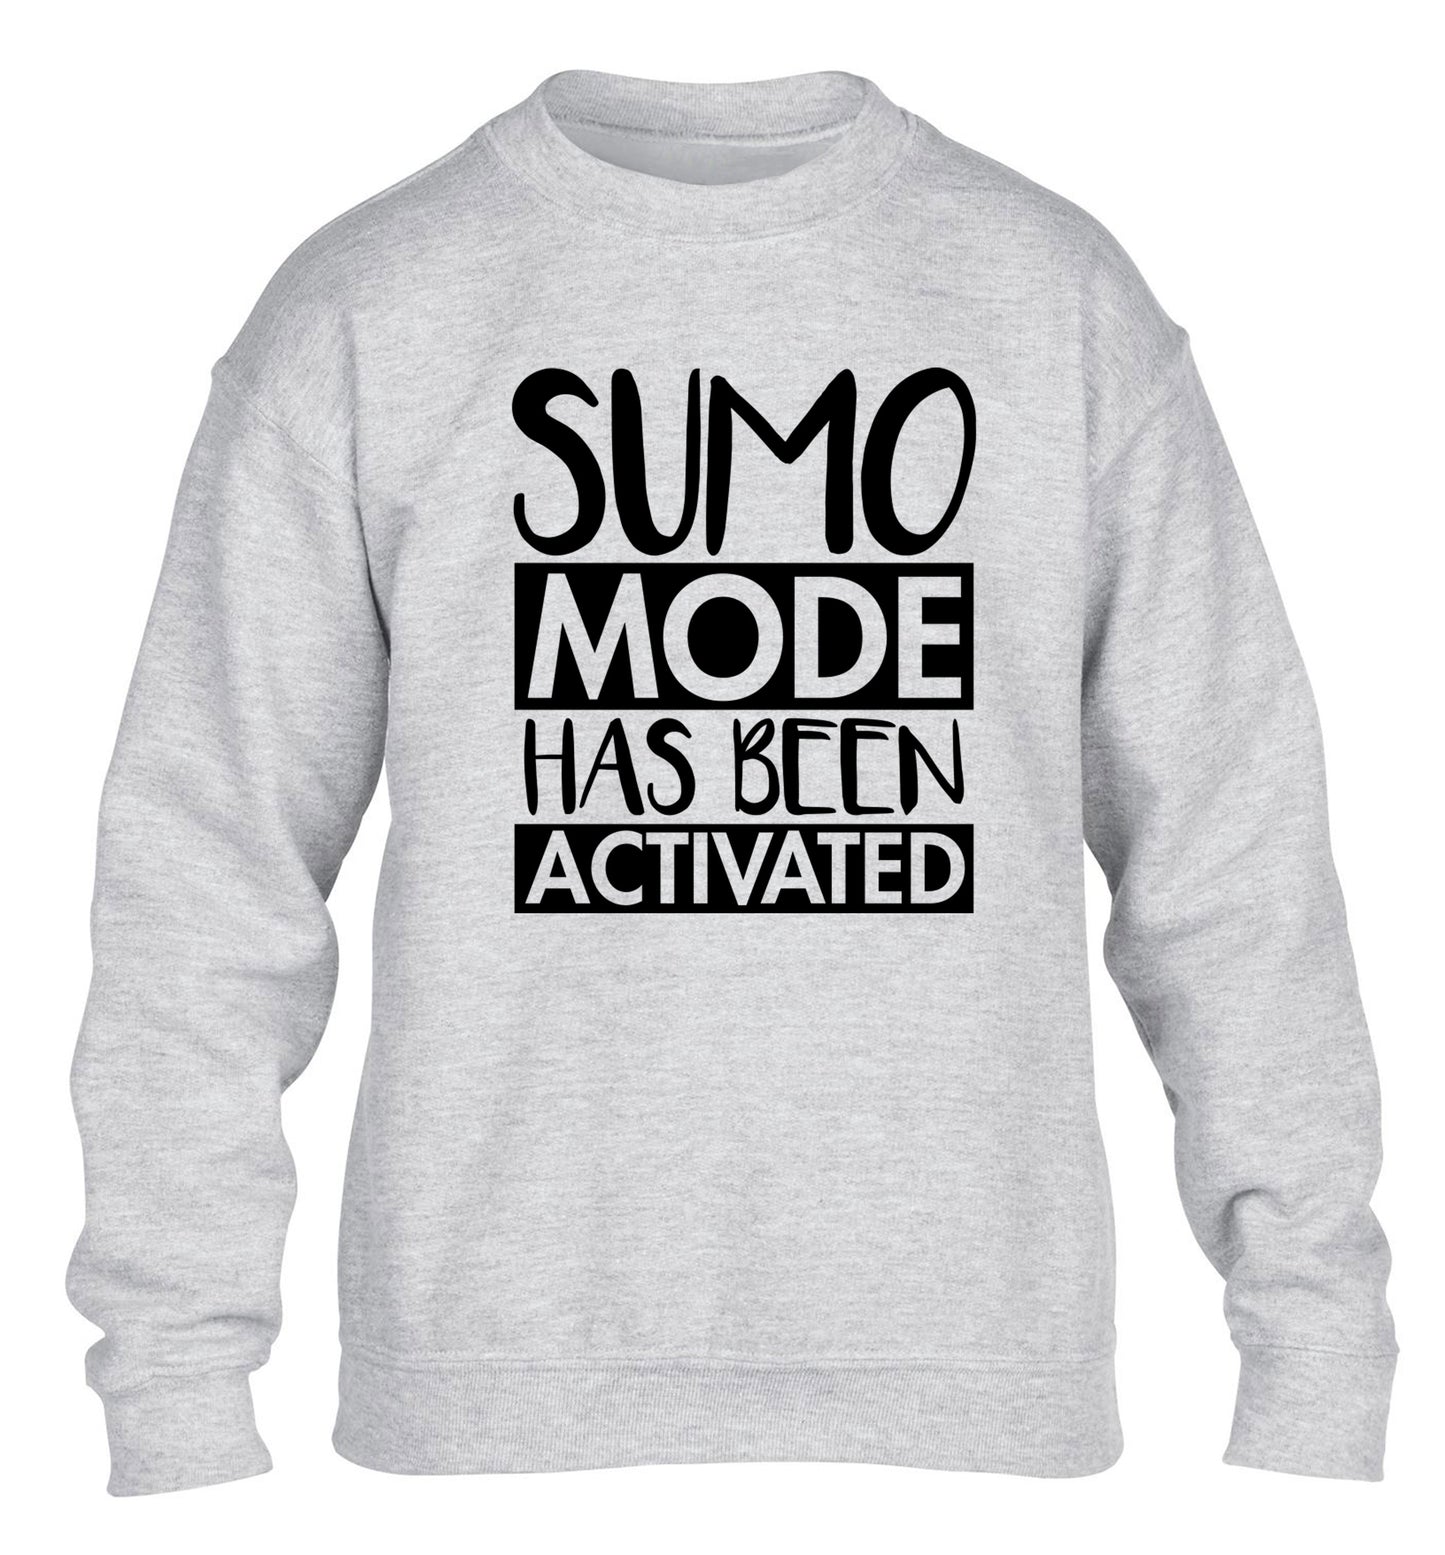 Sumo mode activated children's grey sweater 12-14 Years